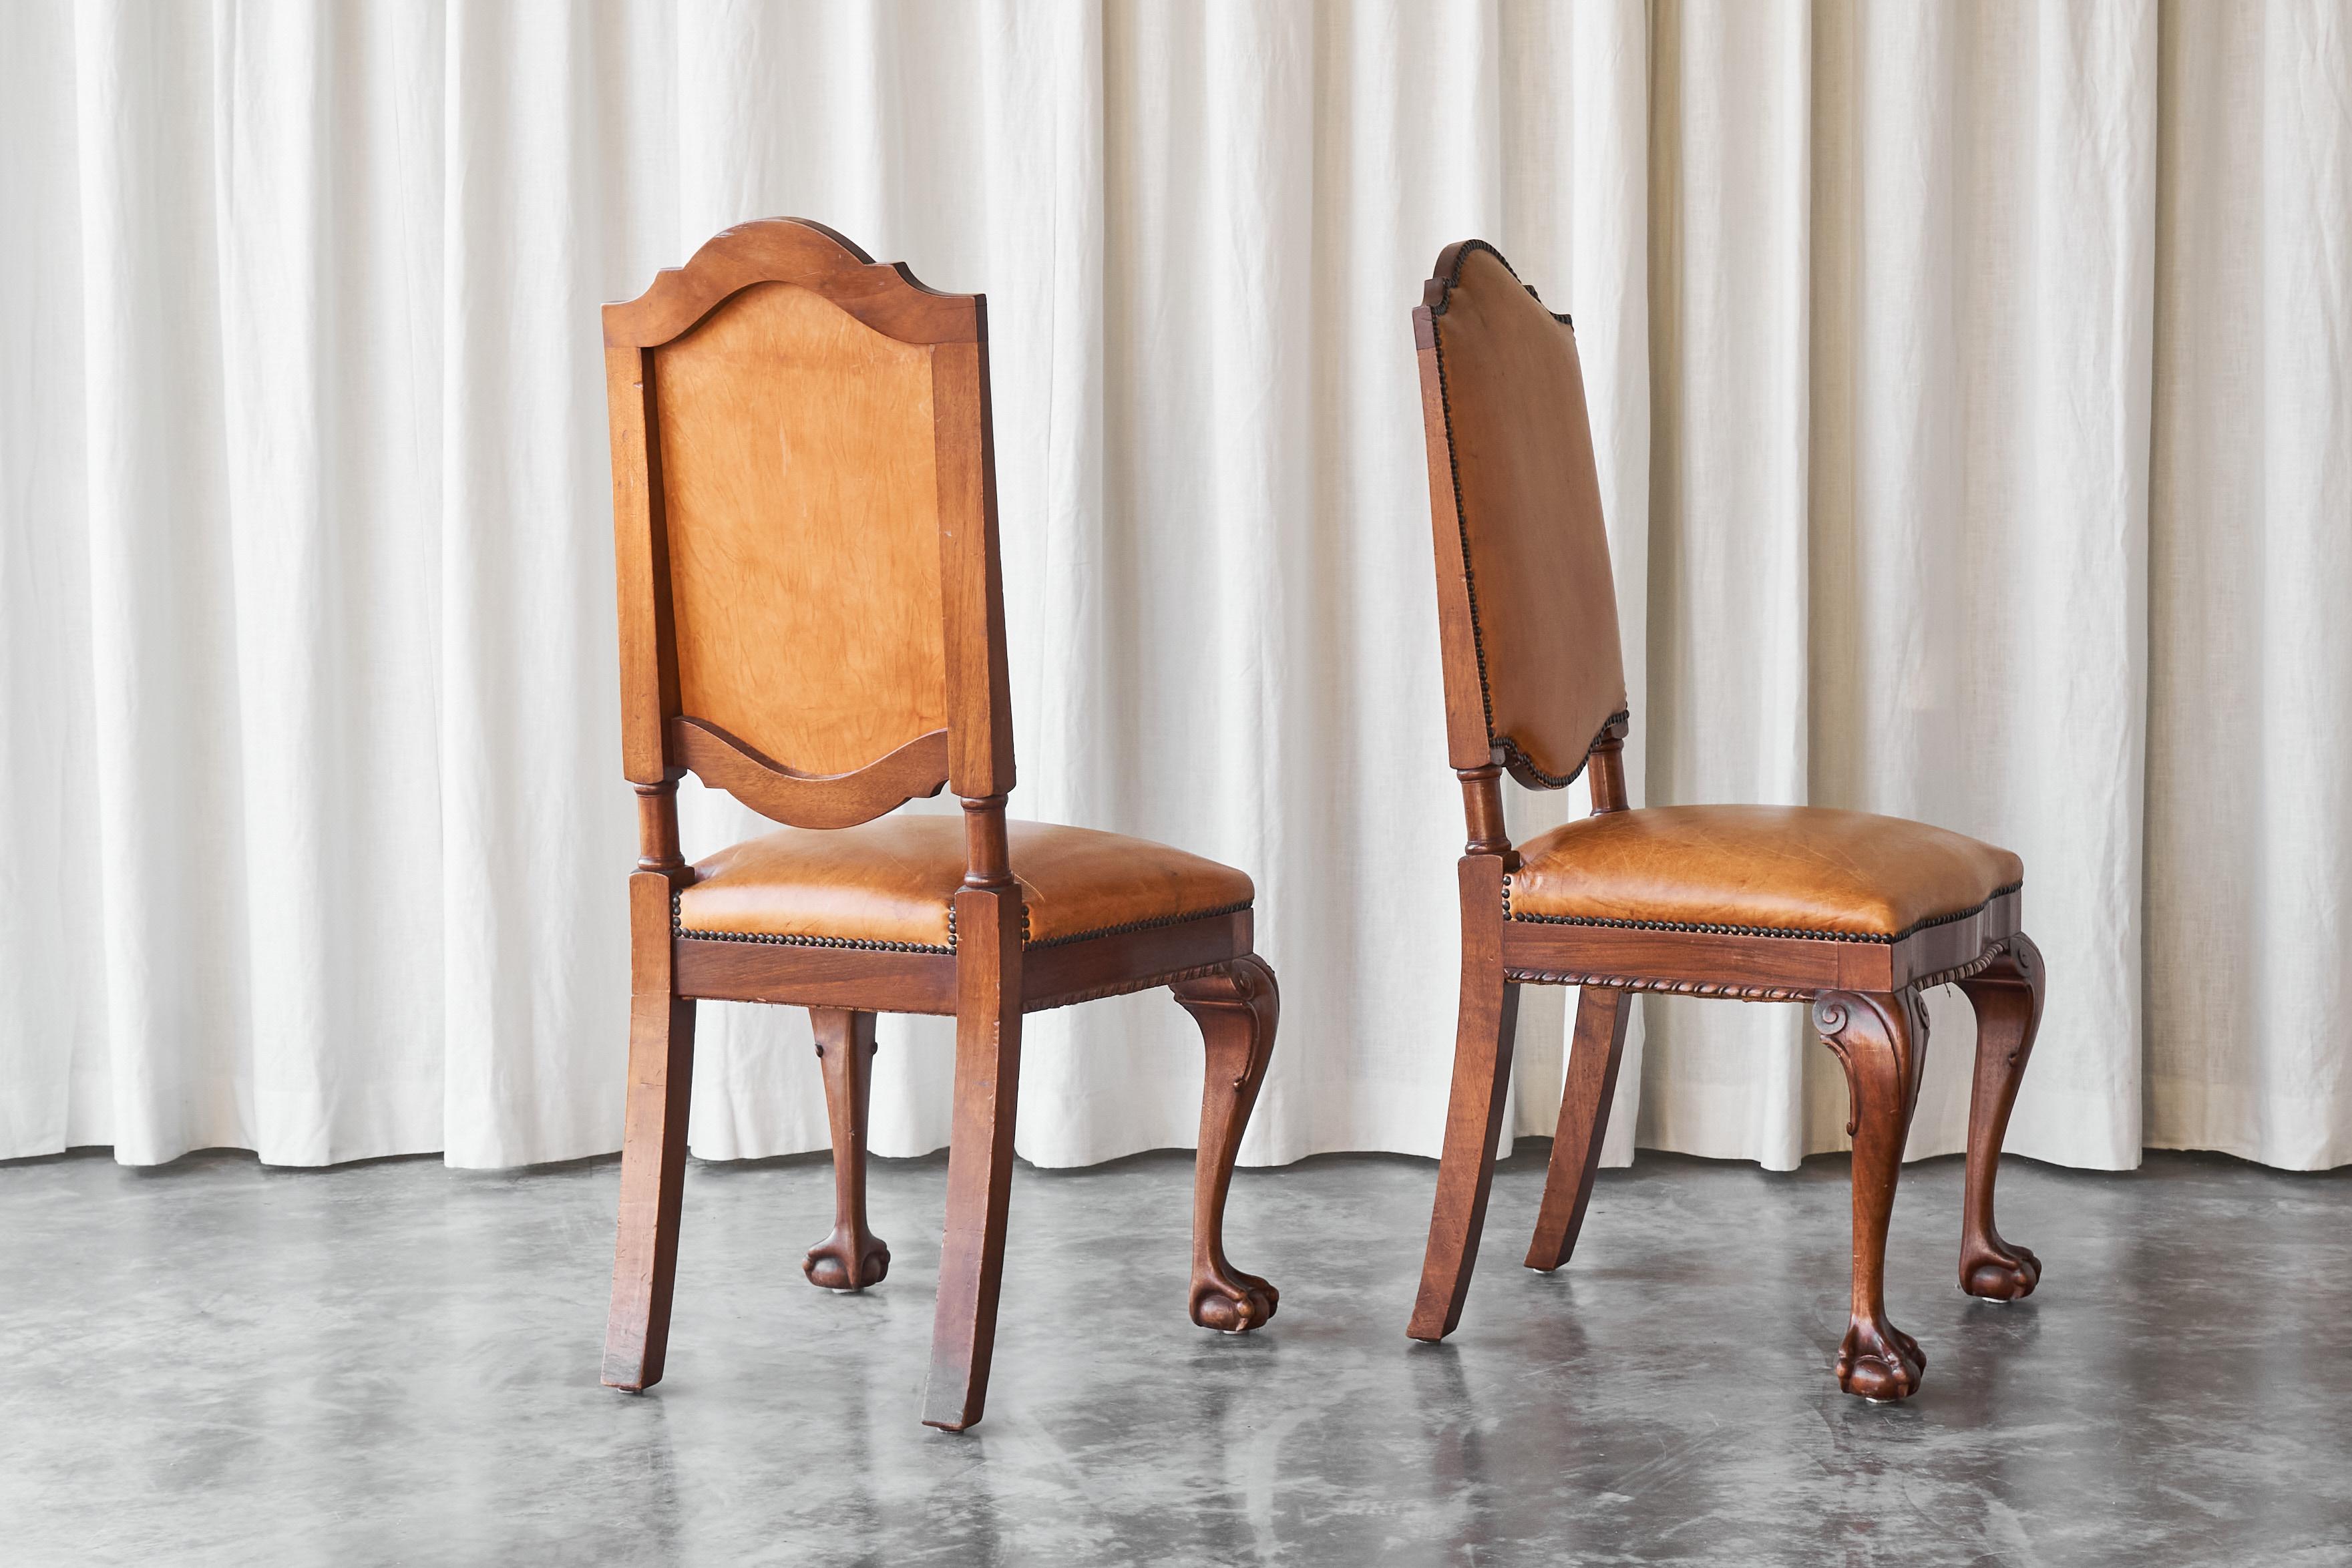 20th Century 't Woonhuys Amsterdam Rare Pair of Side Chairs in Patinated Cognac Leather 1920s For Sale